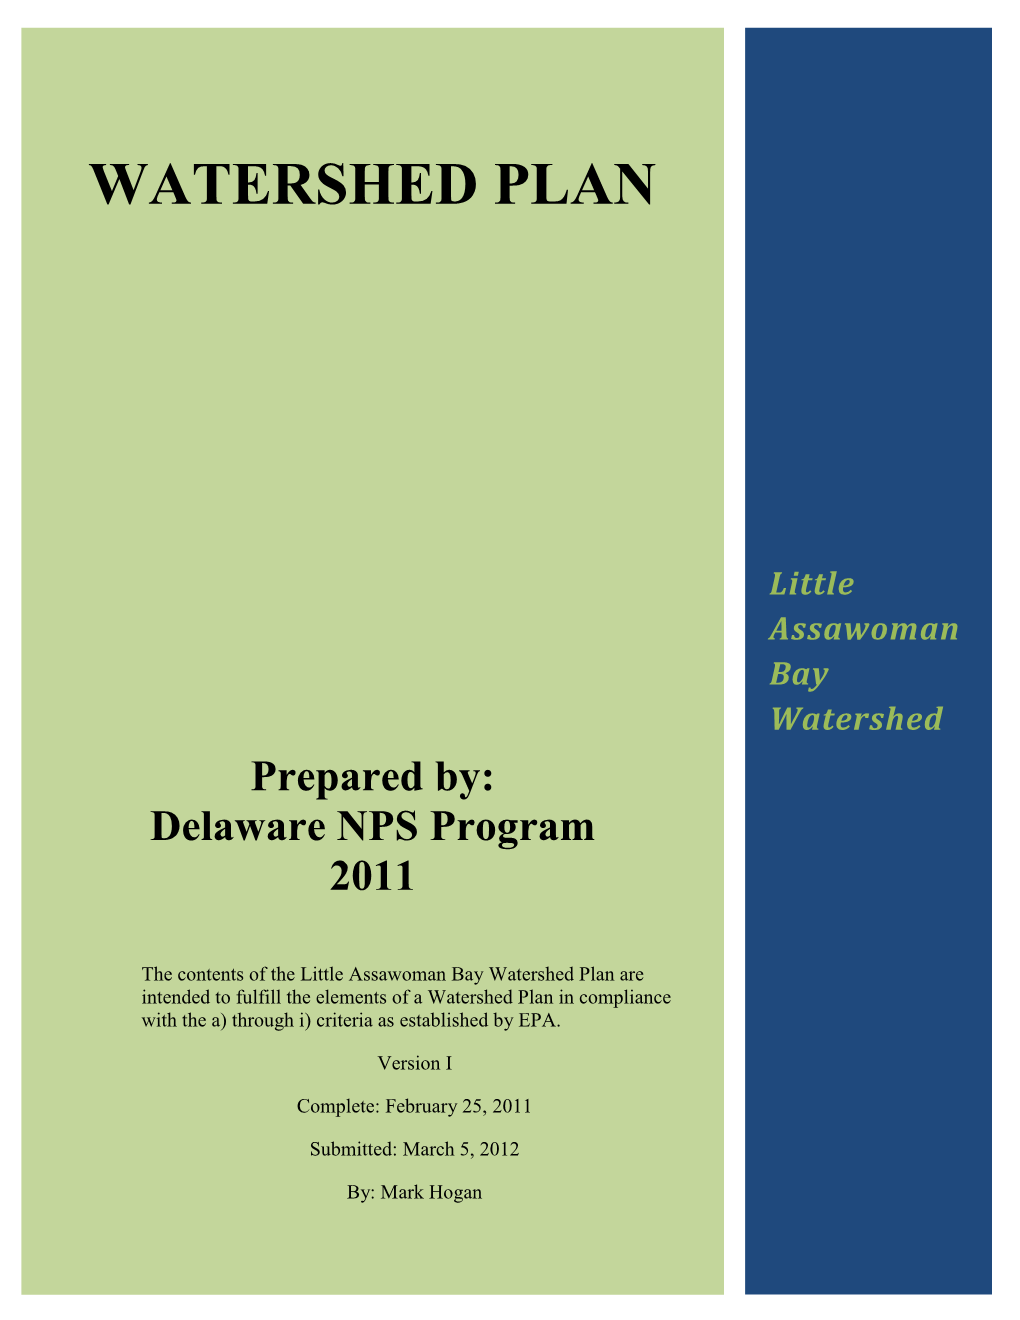 Little Assawoman Bay Watershed Plan Are Intended to Fulfill the Elements of a Watershed Plan in Compliance with the A) Through I) Criteria As Established by EPA